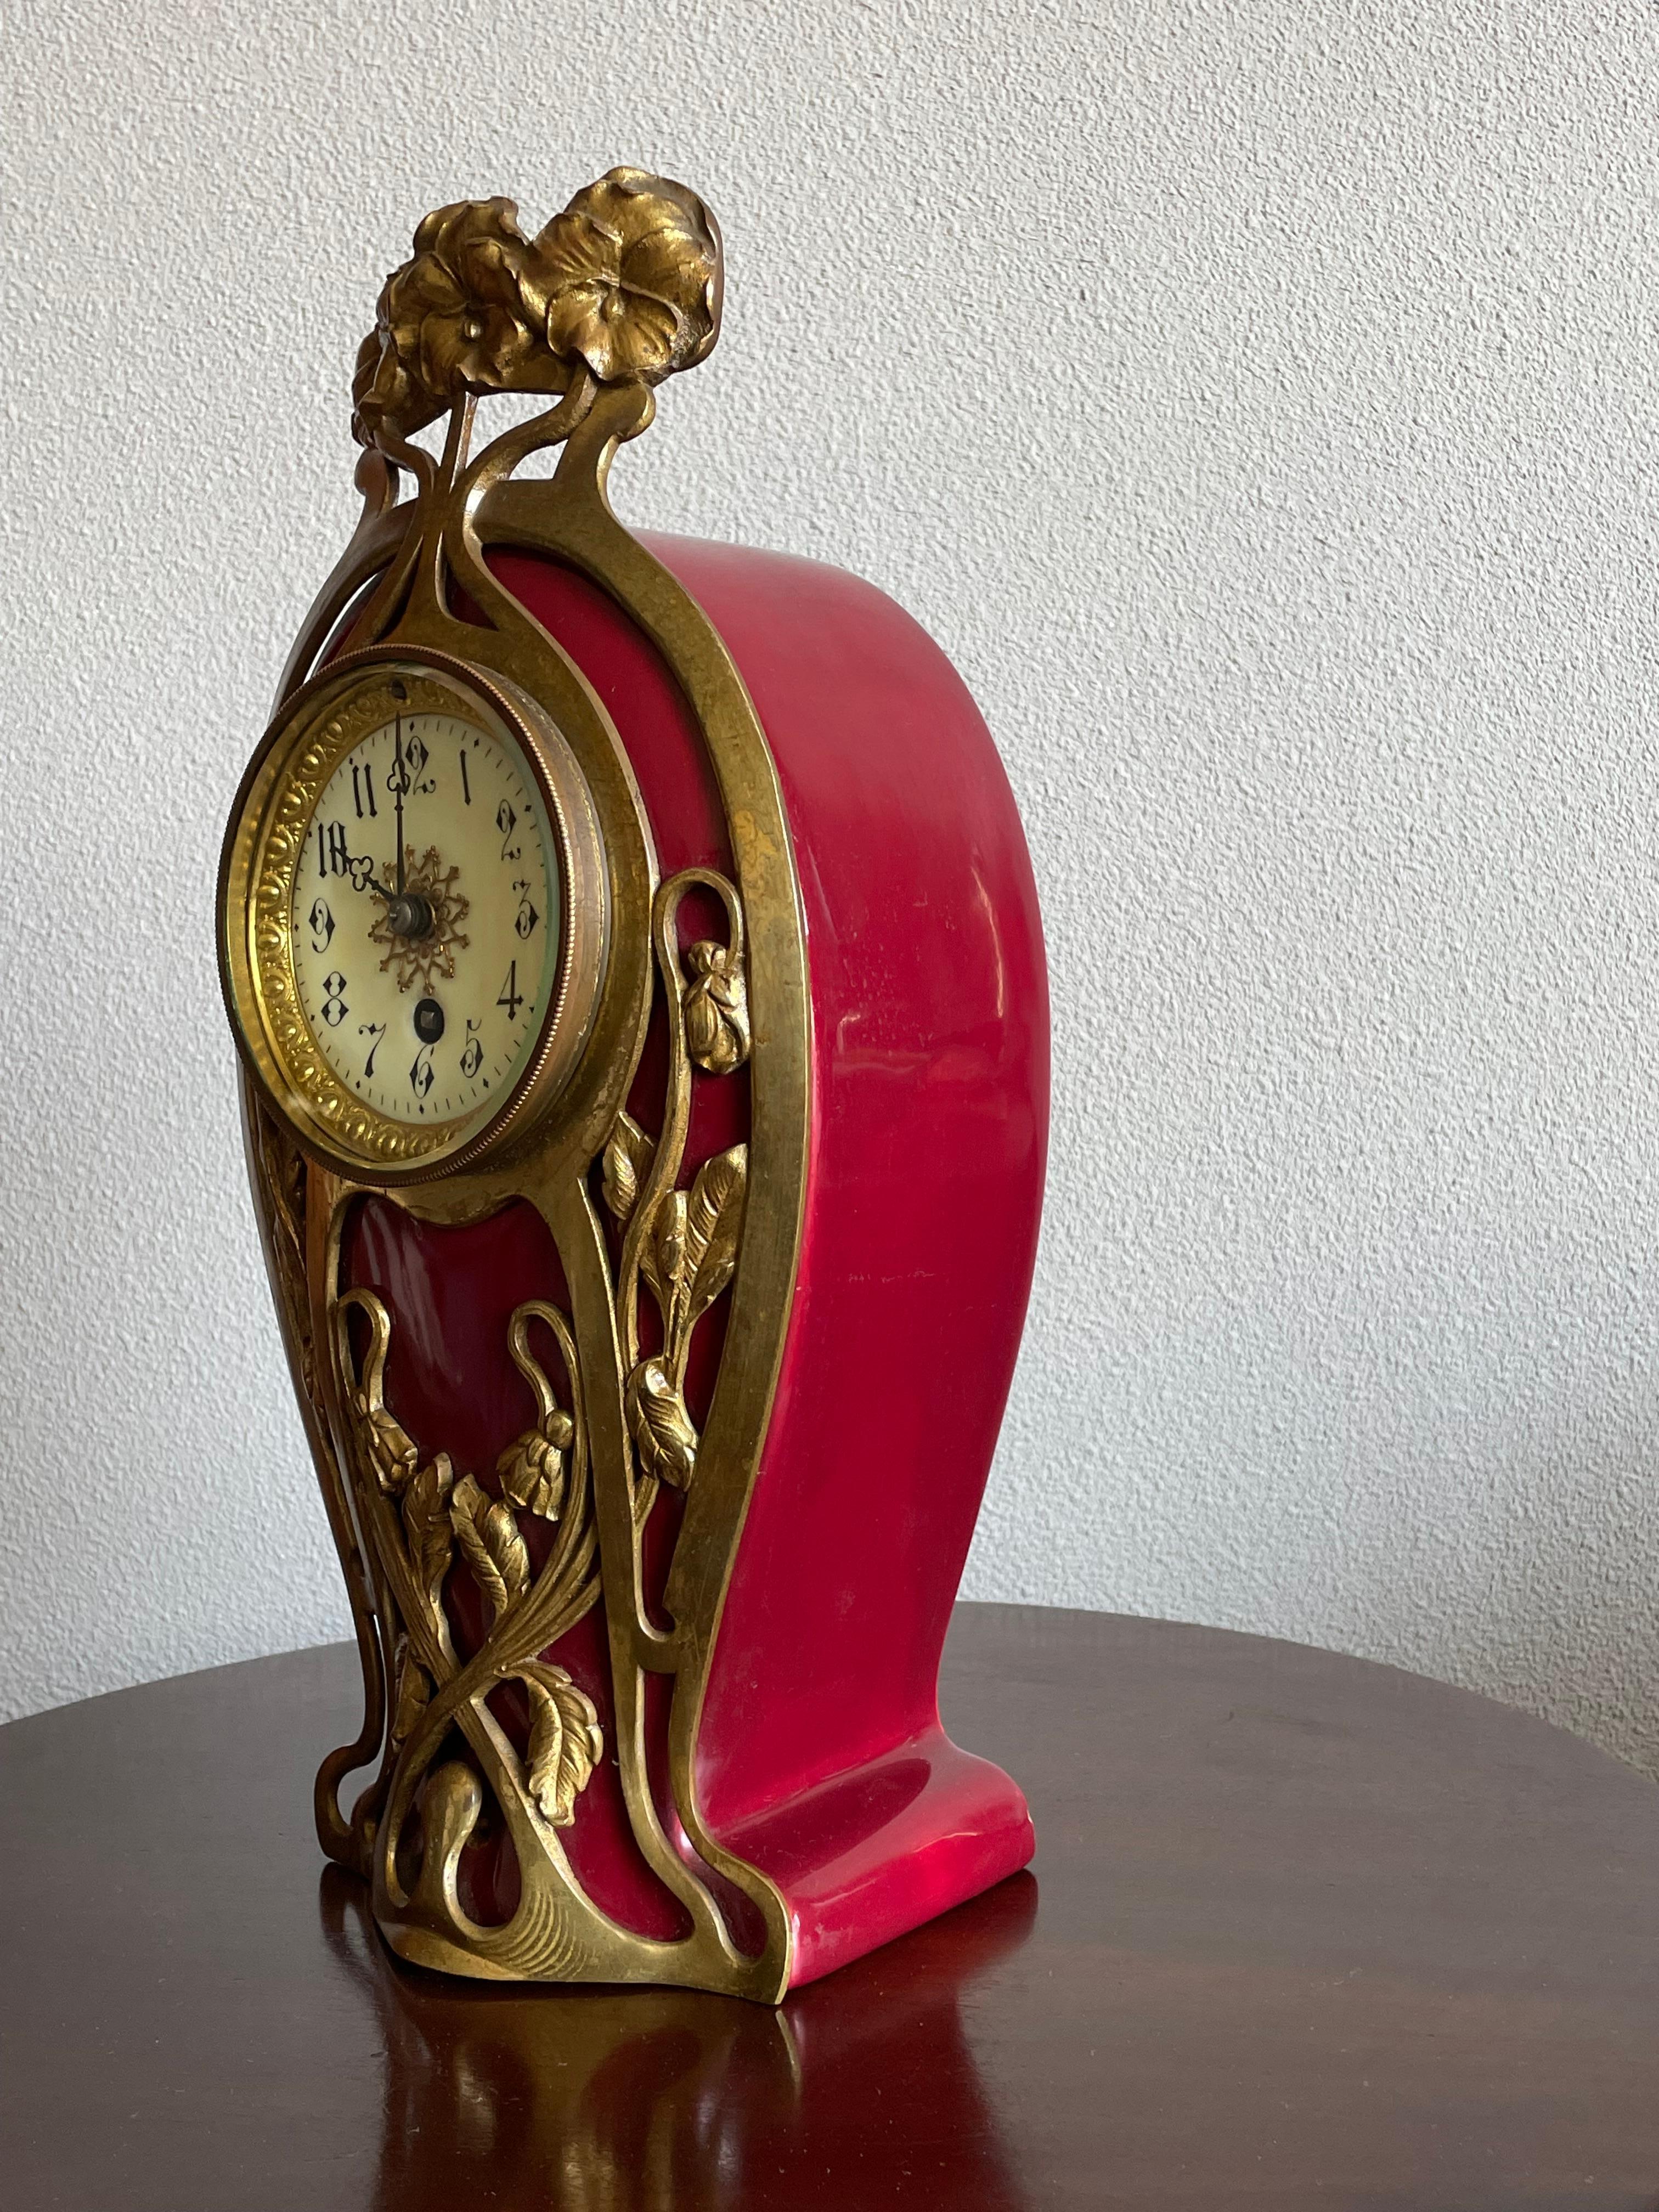 Rare and stunning majolica glazed antique clock from the European Art Nouveau era.

If you like rare Arts & Crafts antiques in general and marvelous clocks in particular then this handcrafted table clock from circa 1900-1910 could be the perfect